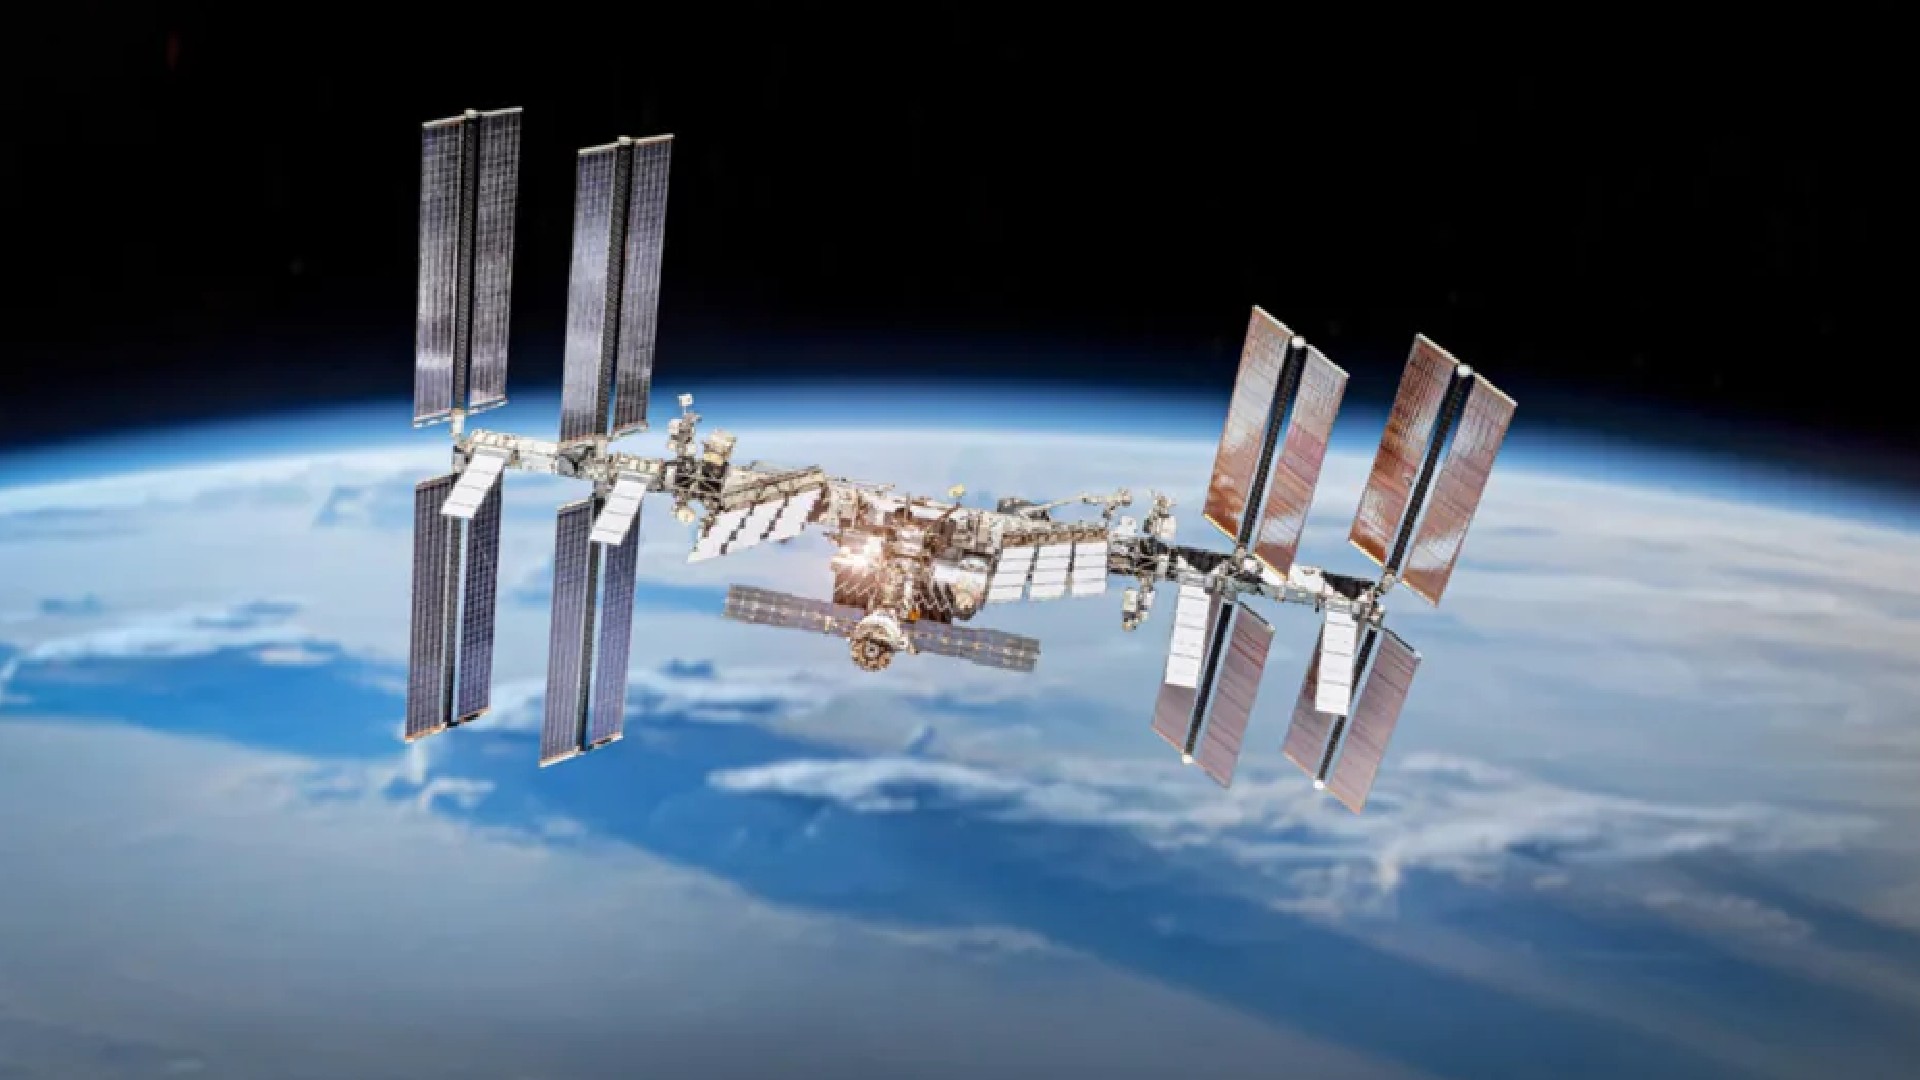 Russian Portion Of Iss Reported Having A Burning Smell And Smoke.